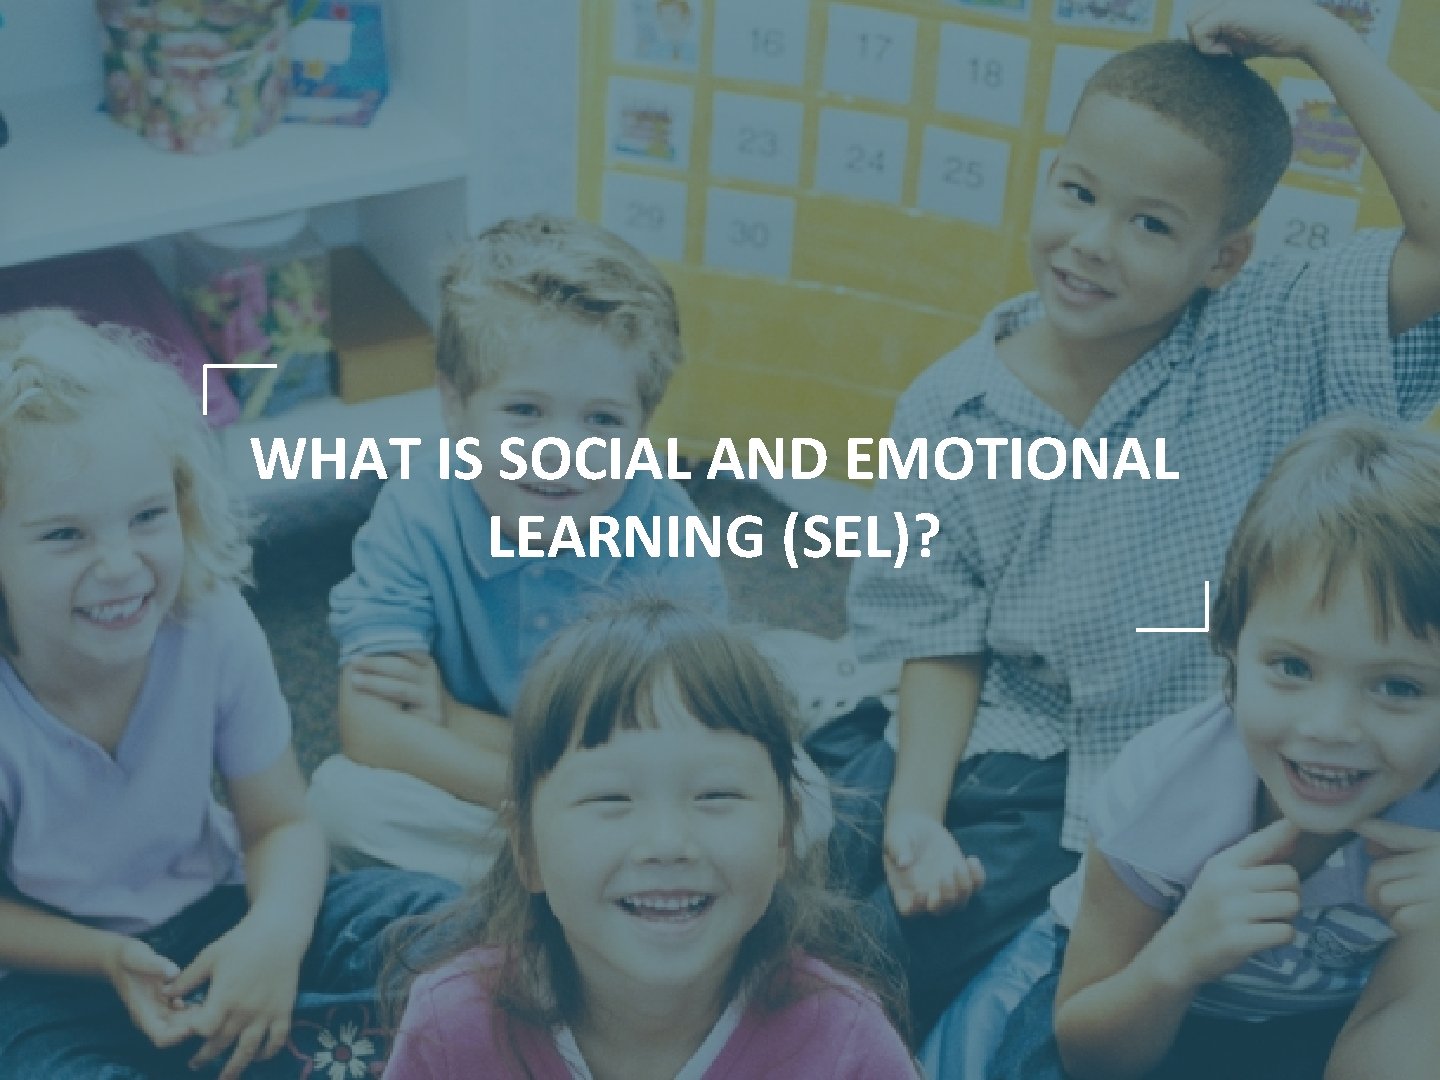 WHAT IS SOCIAL AND EMOTIONAL LEARNING (SEL)? 